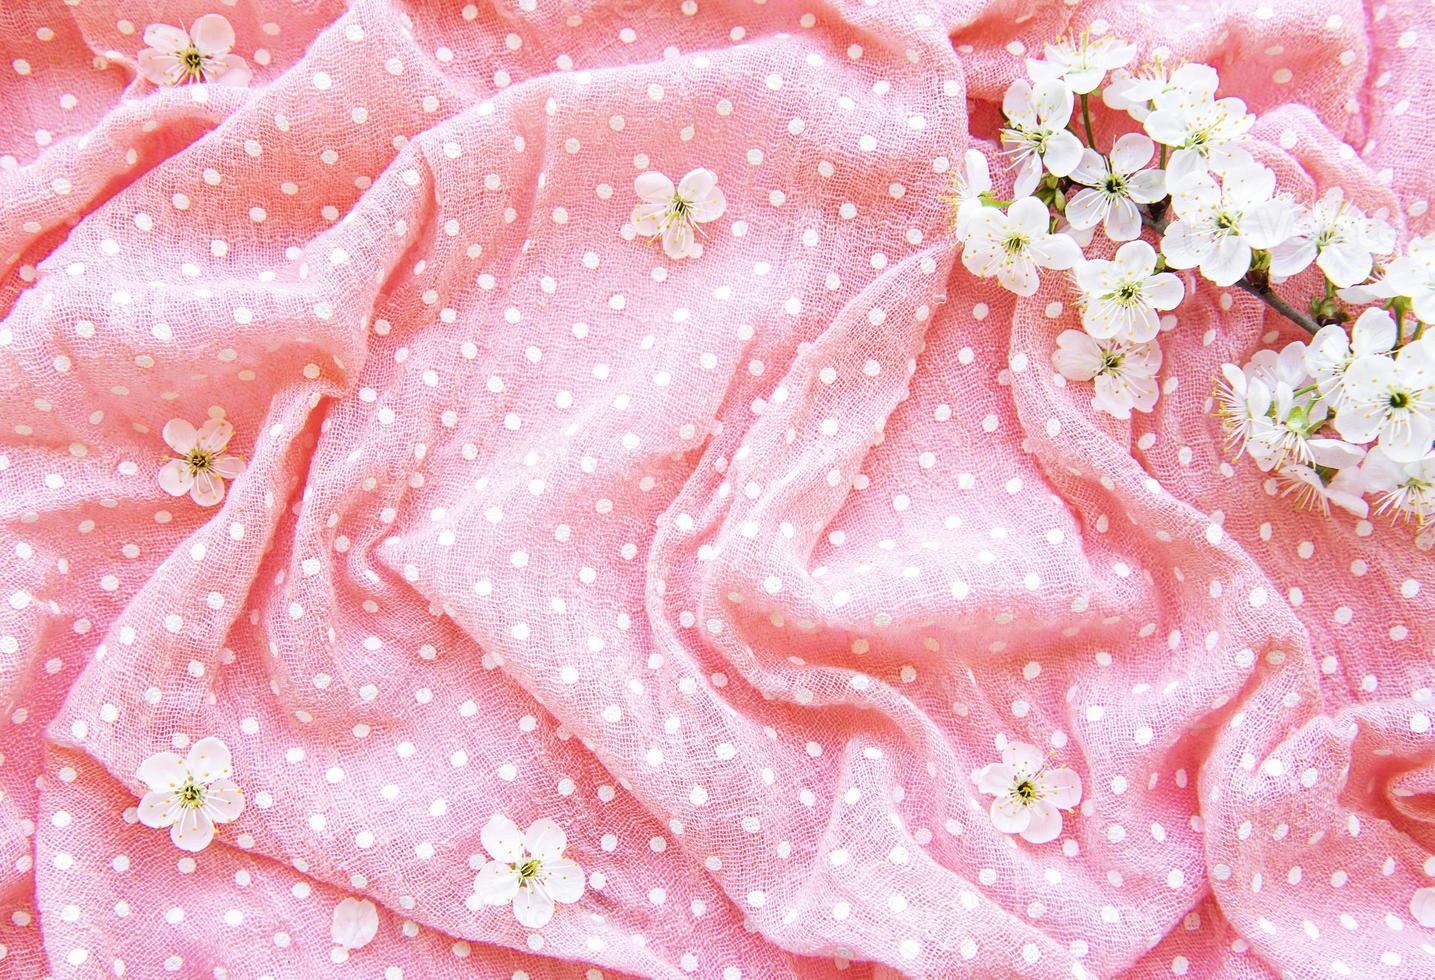 Polka dot pink and white fabric and spring blossom photo